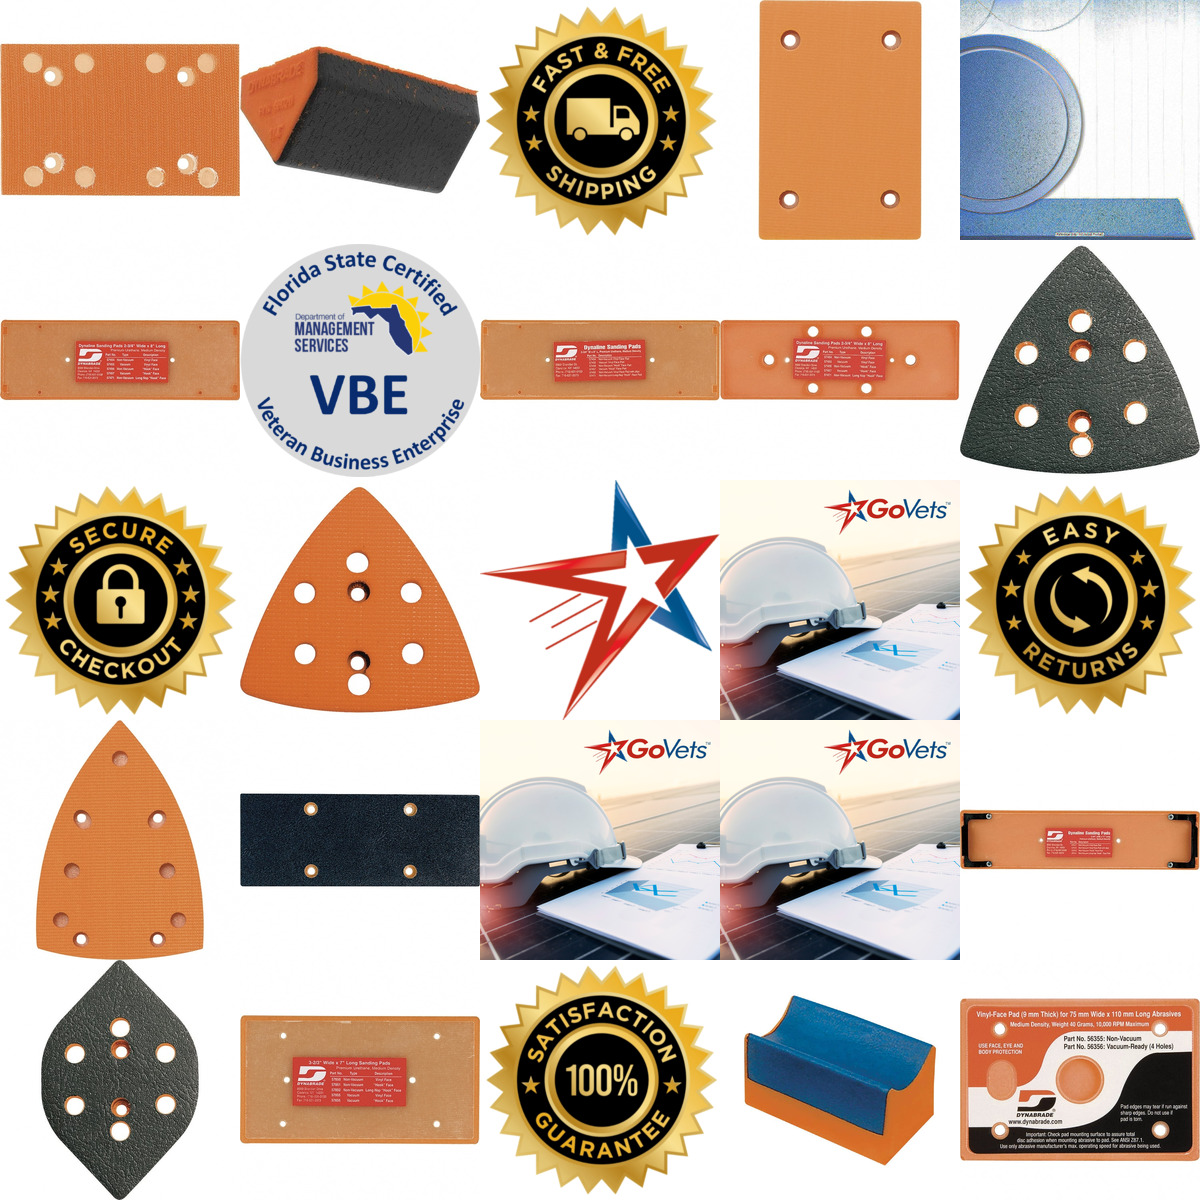 A selection of Sheet and Non Round Backing Pads products on GoVets